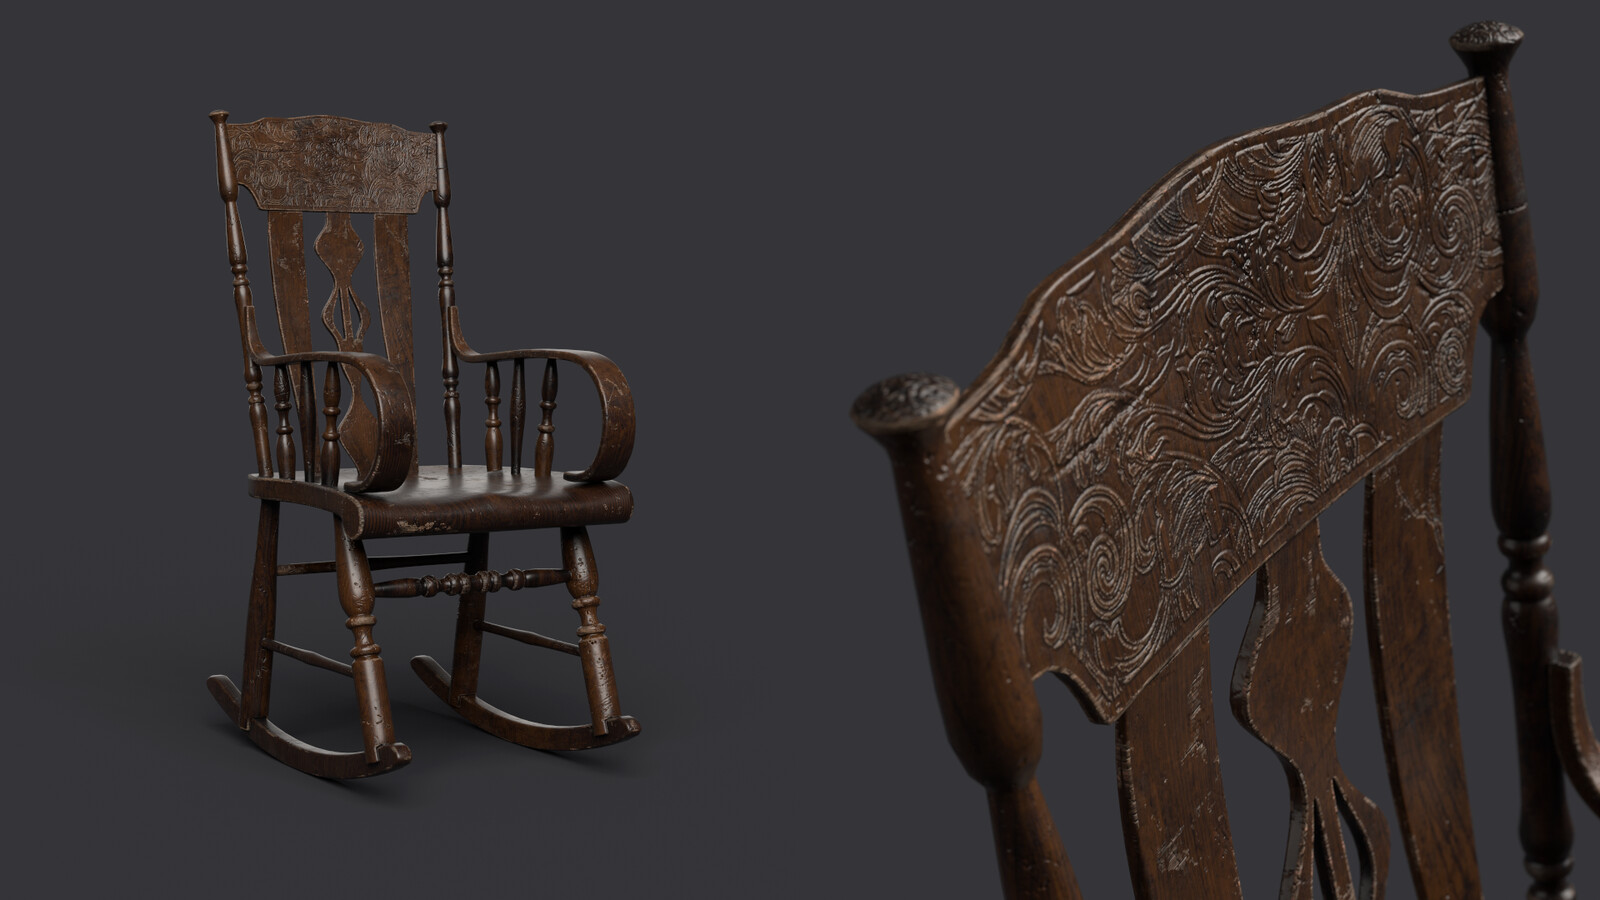 Props - Old rocking chair